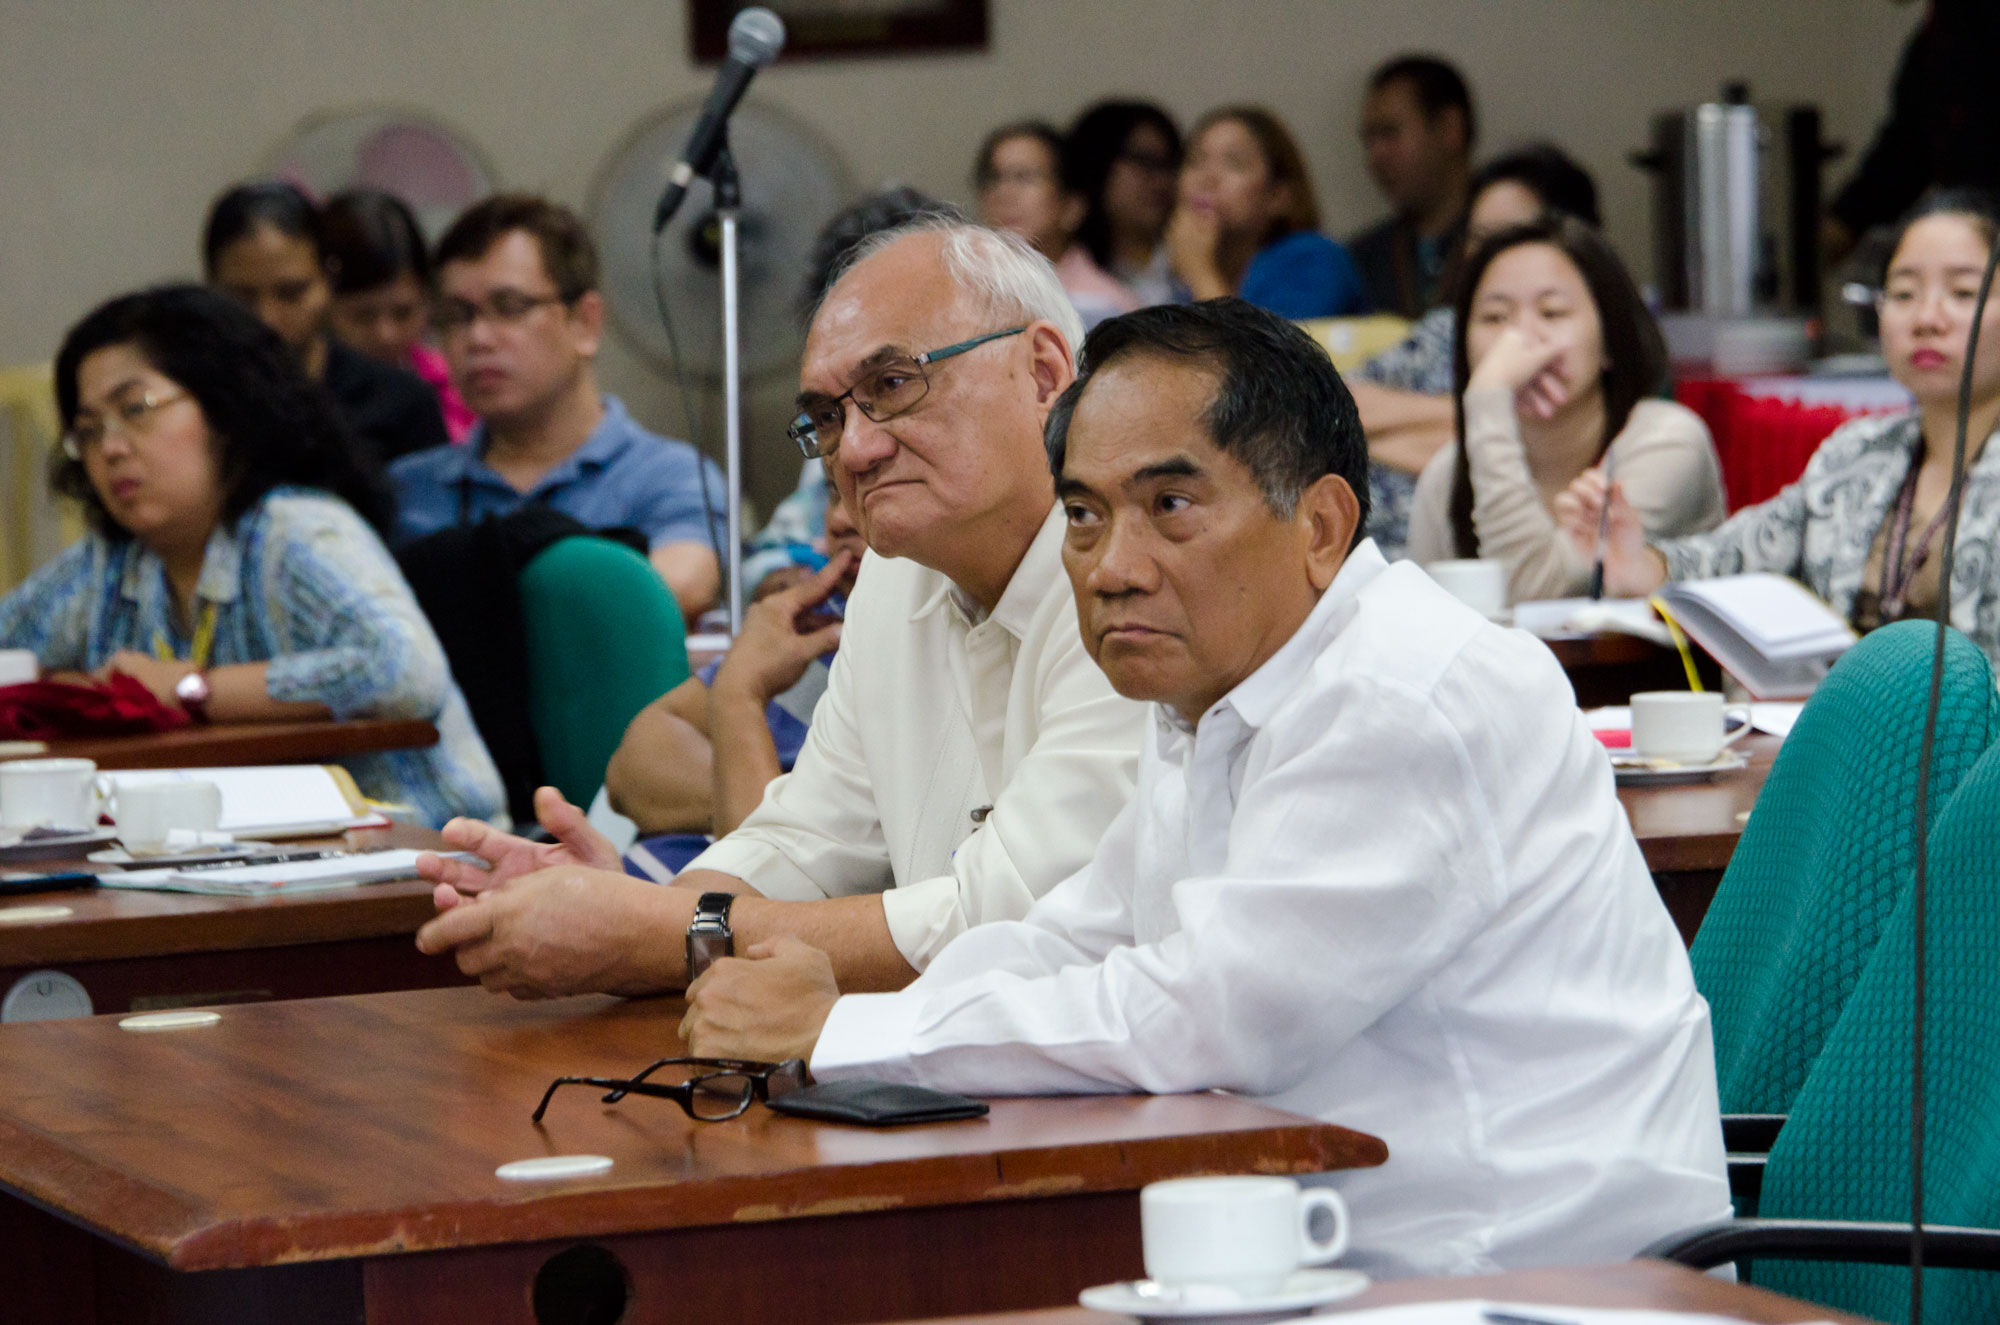 Senate Centennial Lecture Series Assessment Of The Bottom-Up Budgeting Process For FY 2015-GGM_7952.jpg